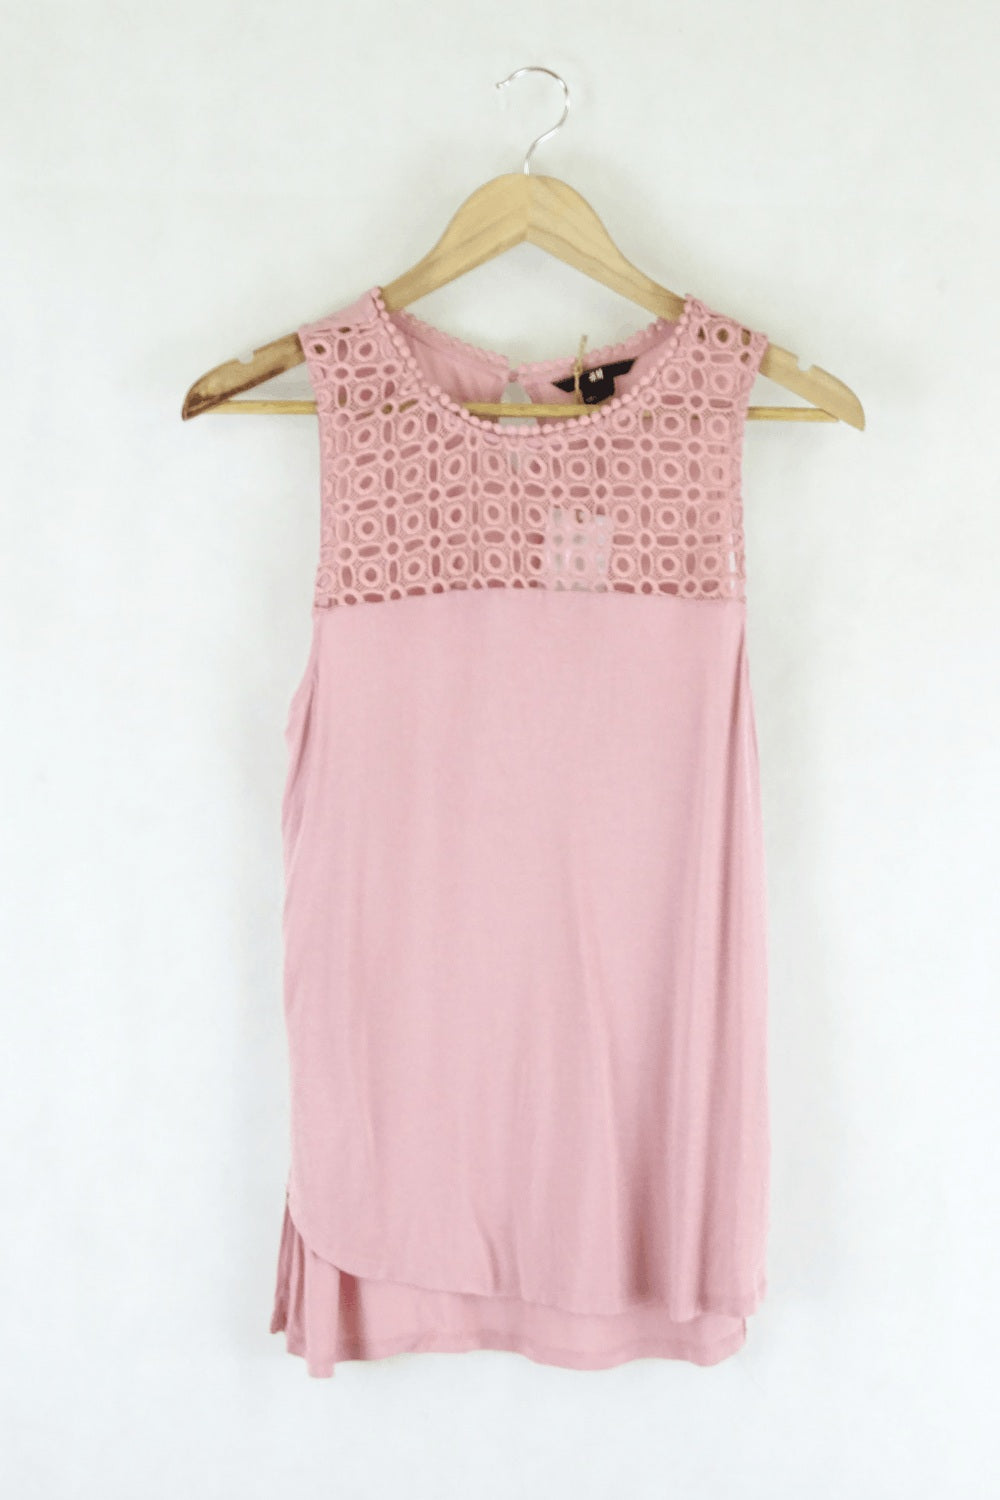 H&amp;M Pink Lace Top S